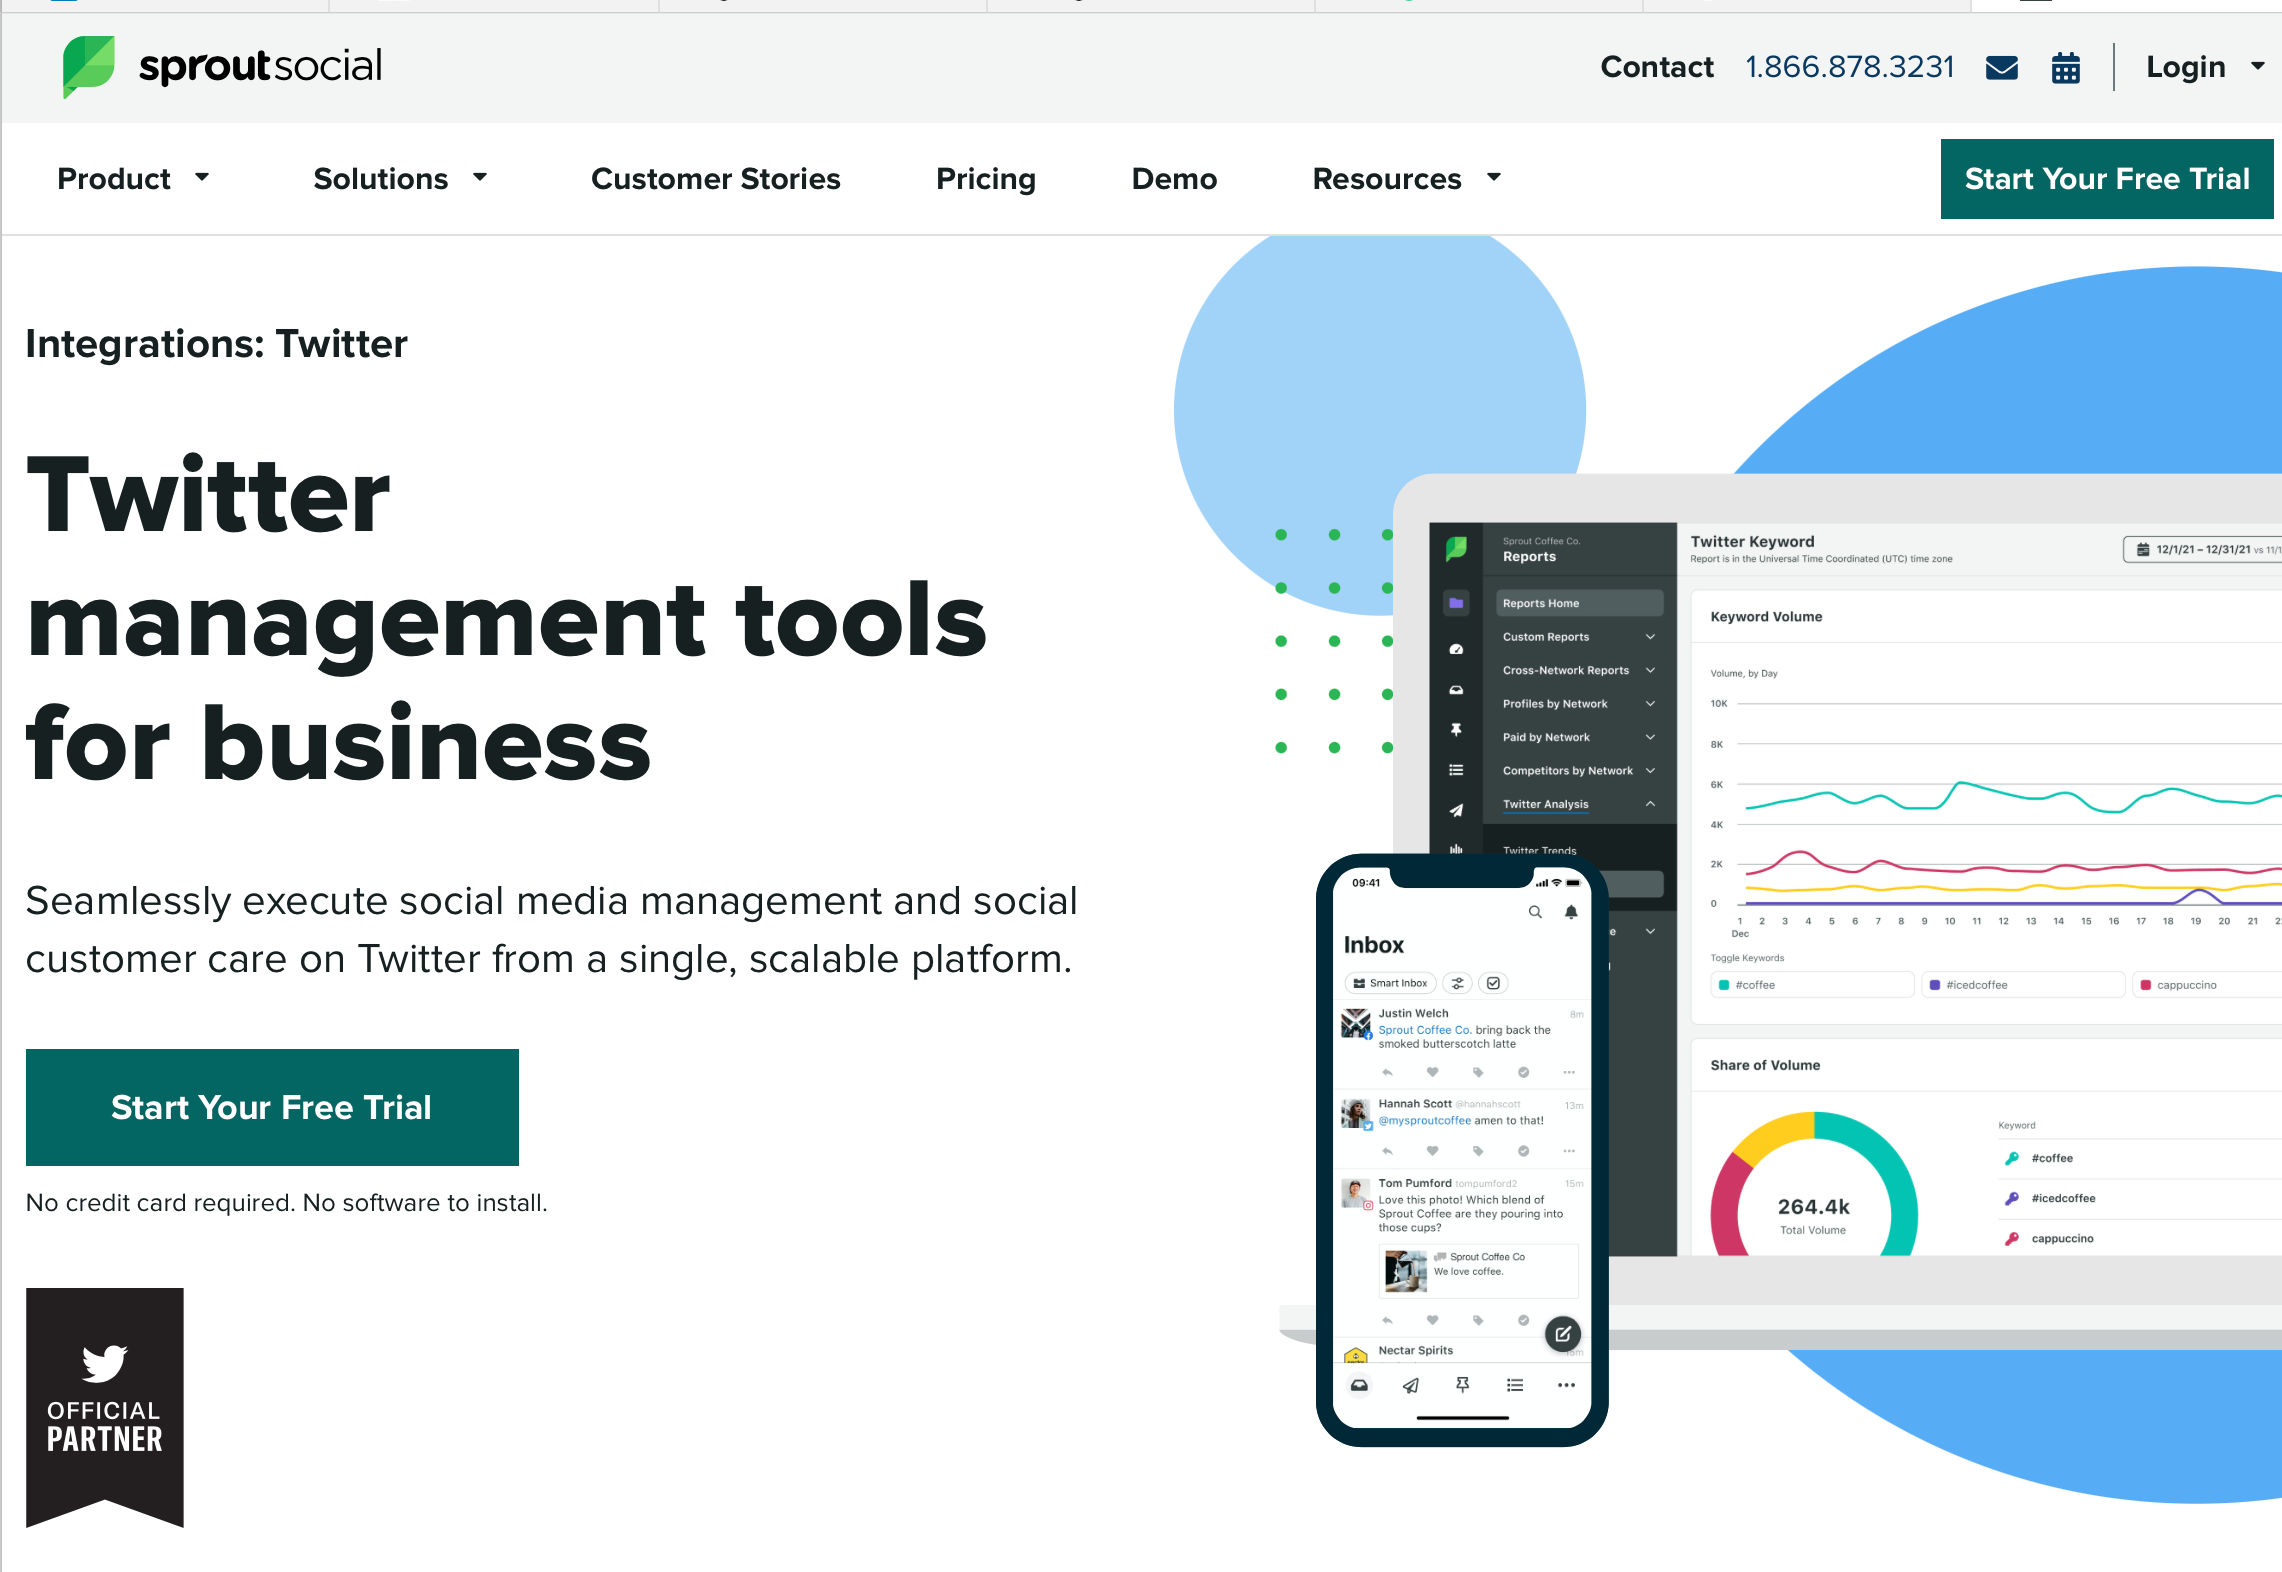 Screenshot of sproutsocial.com's website homepage